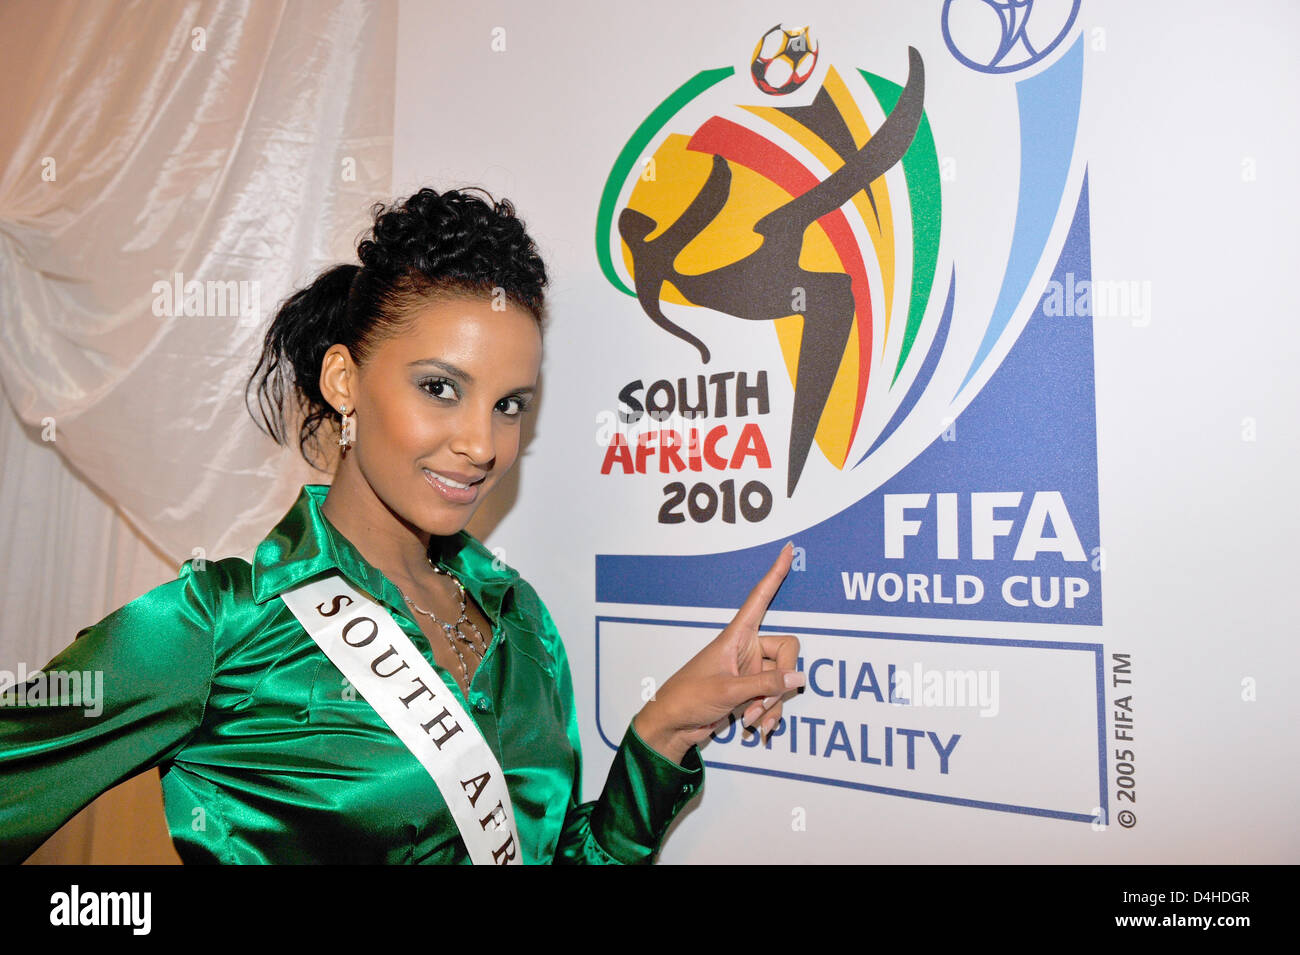 Miss South Africa, Tansey Coetzee, poses in front of the logos of the Confederations Cup 2009 and FIFA Soccer World Cup 2010 in Johannesburg, South Africa, 20 November 2008. Photo: Gero Breloer Stock Photo